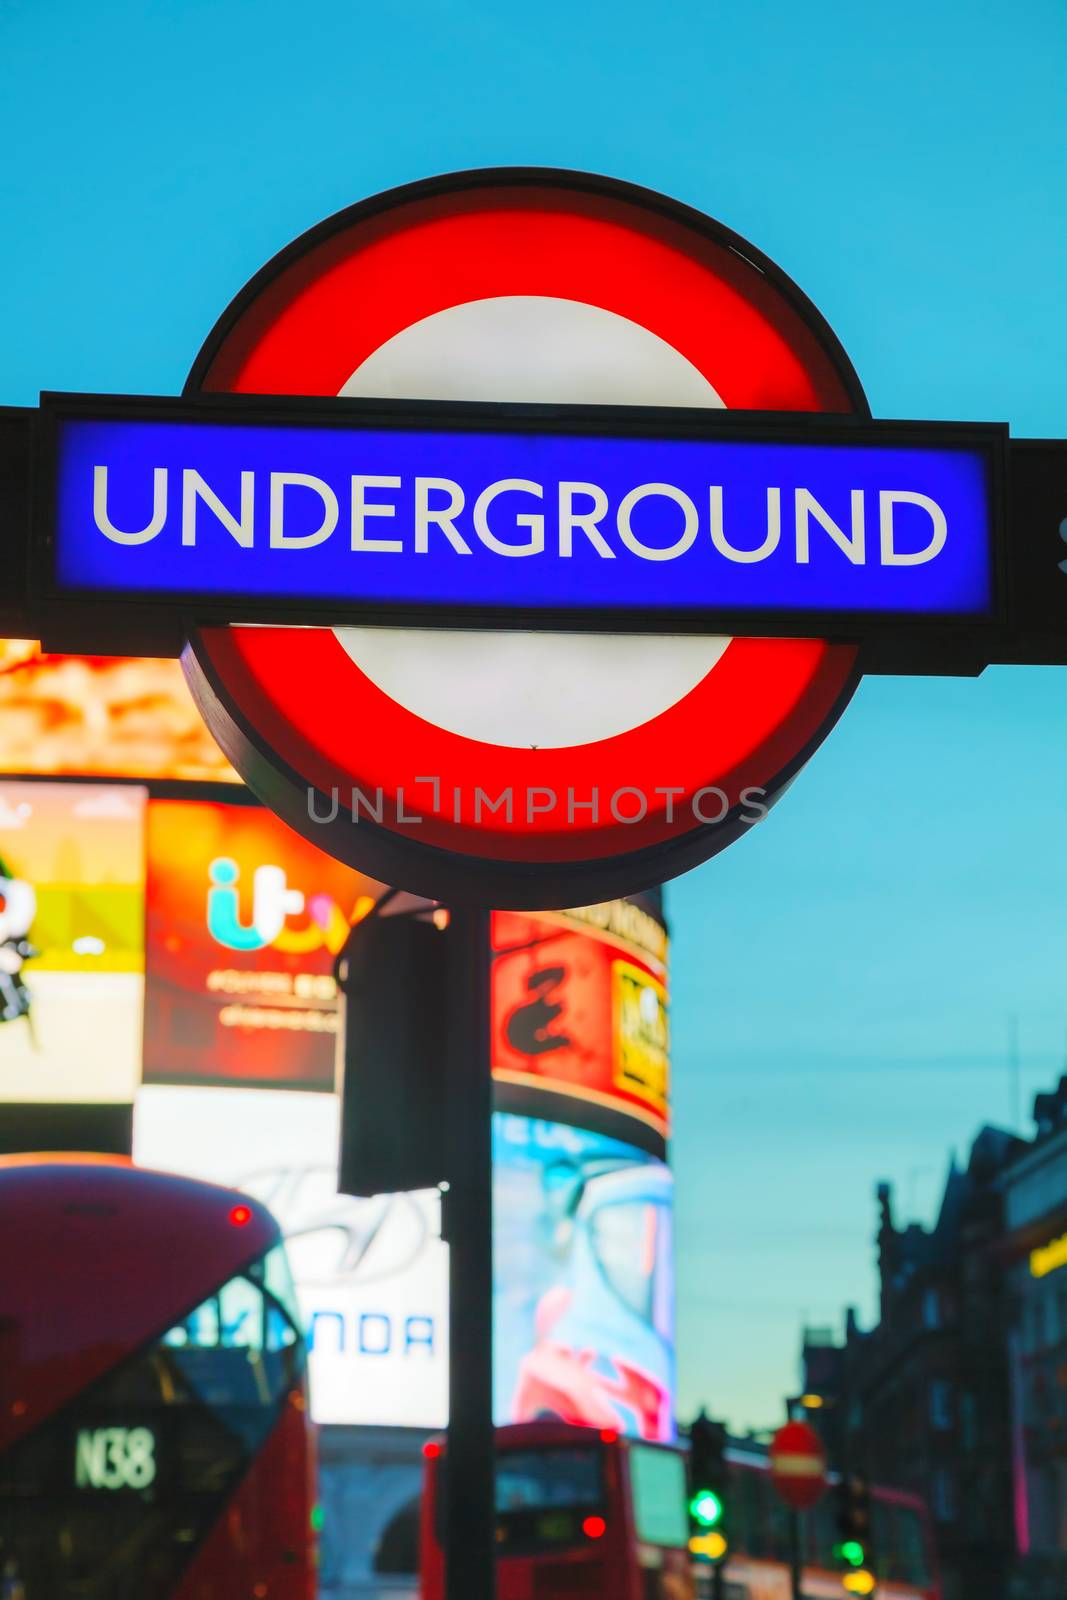 London underground sign by AndreyKr